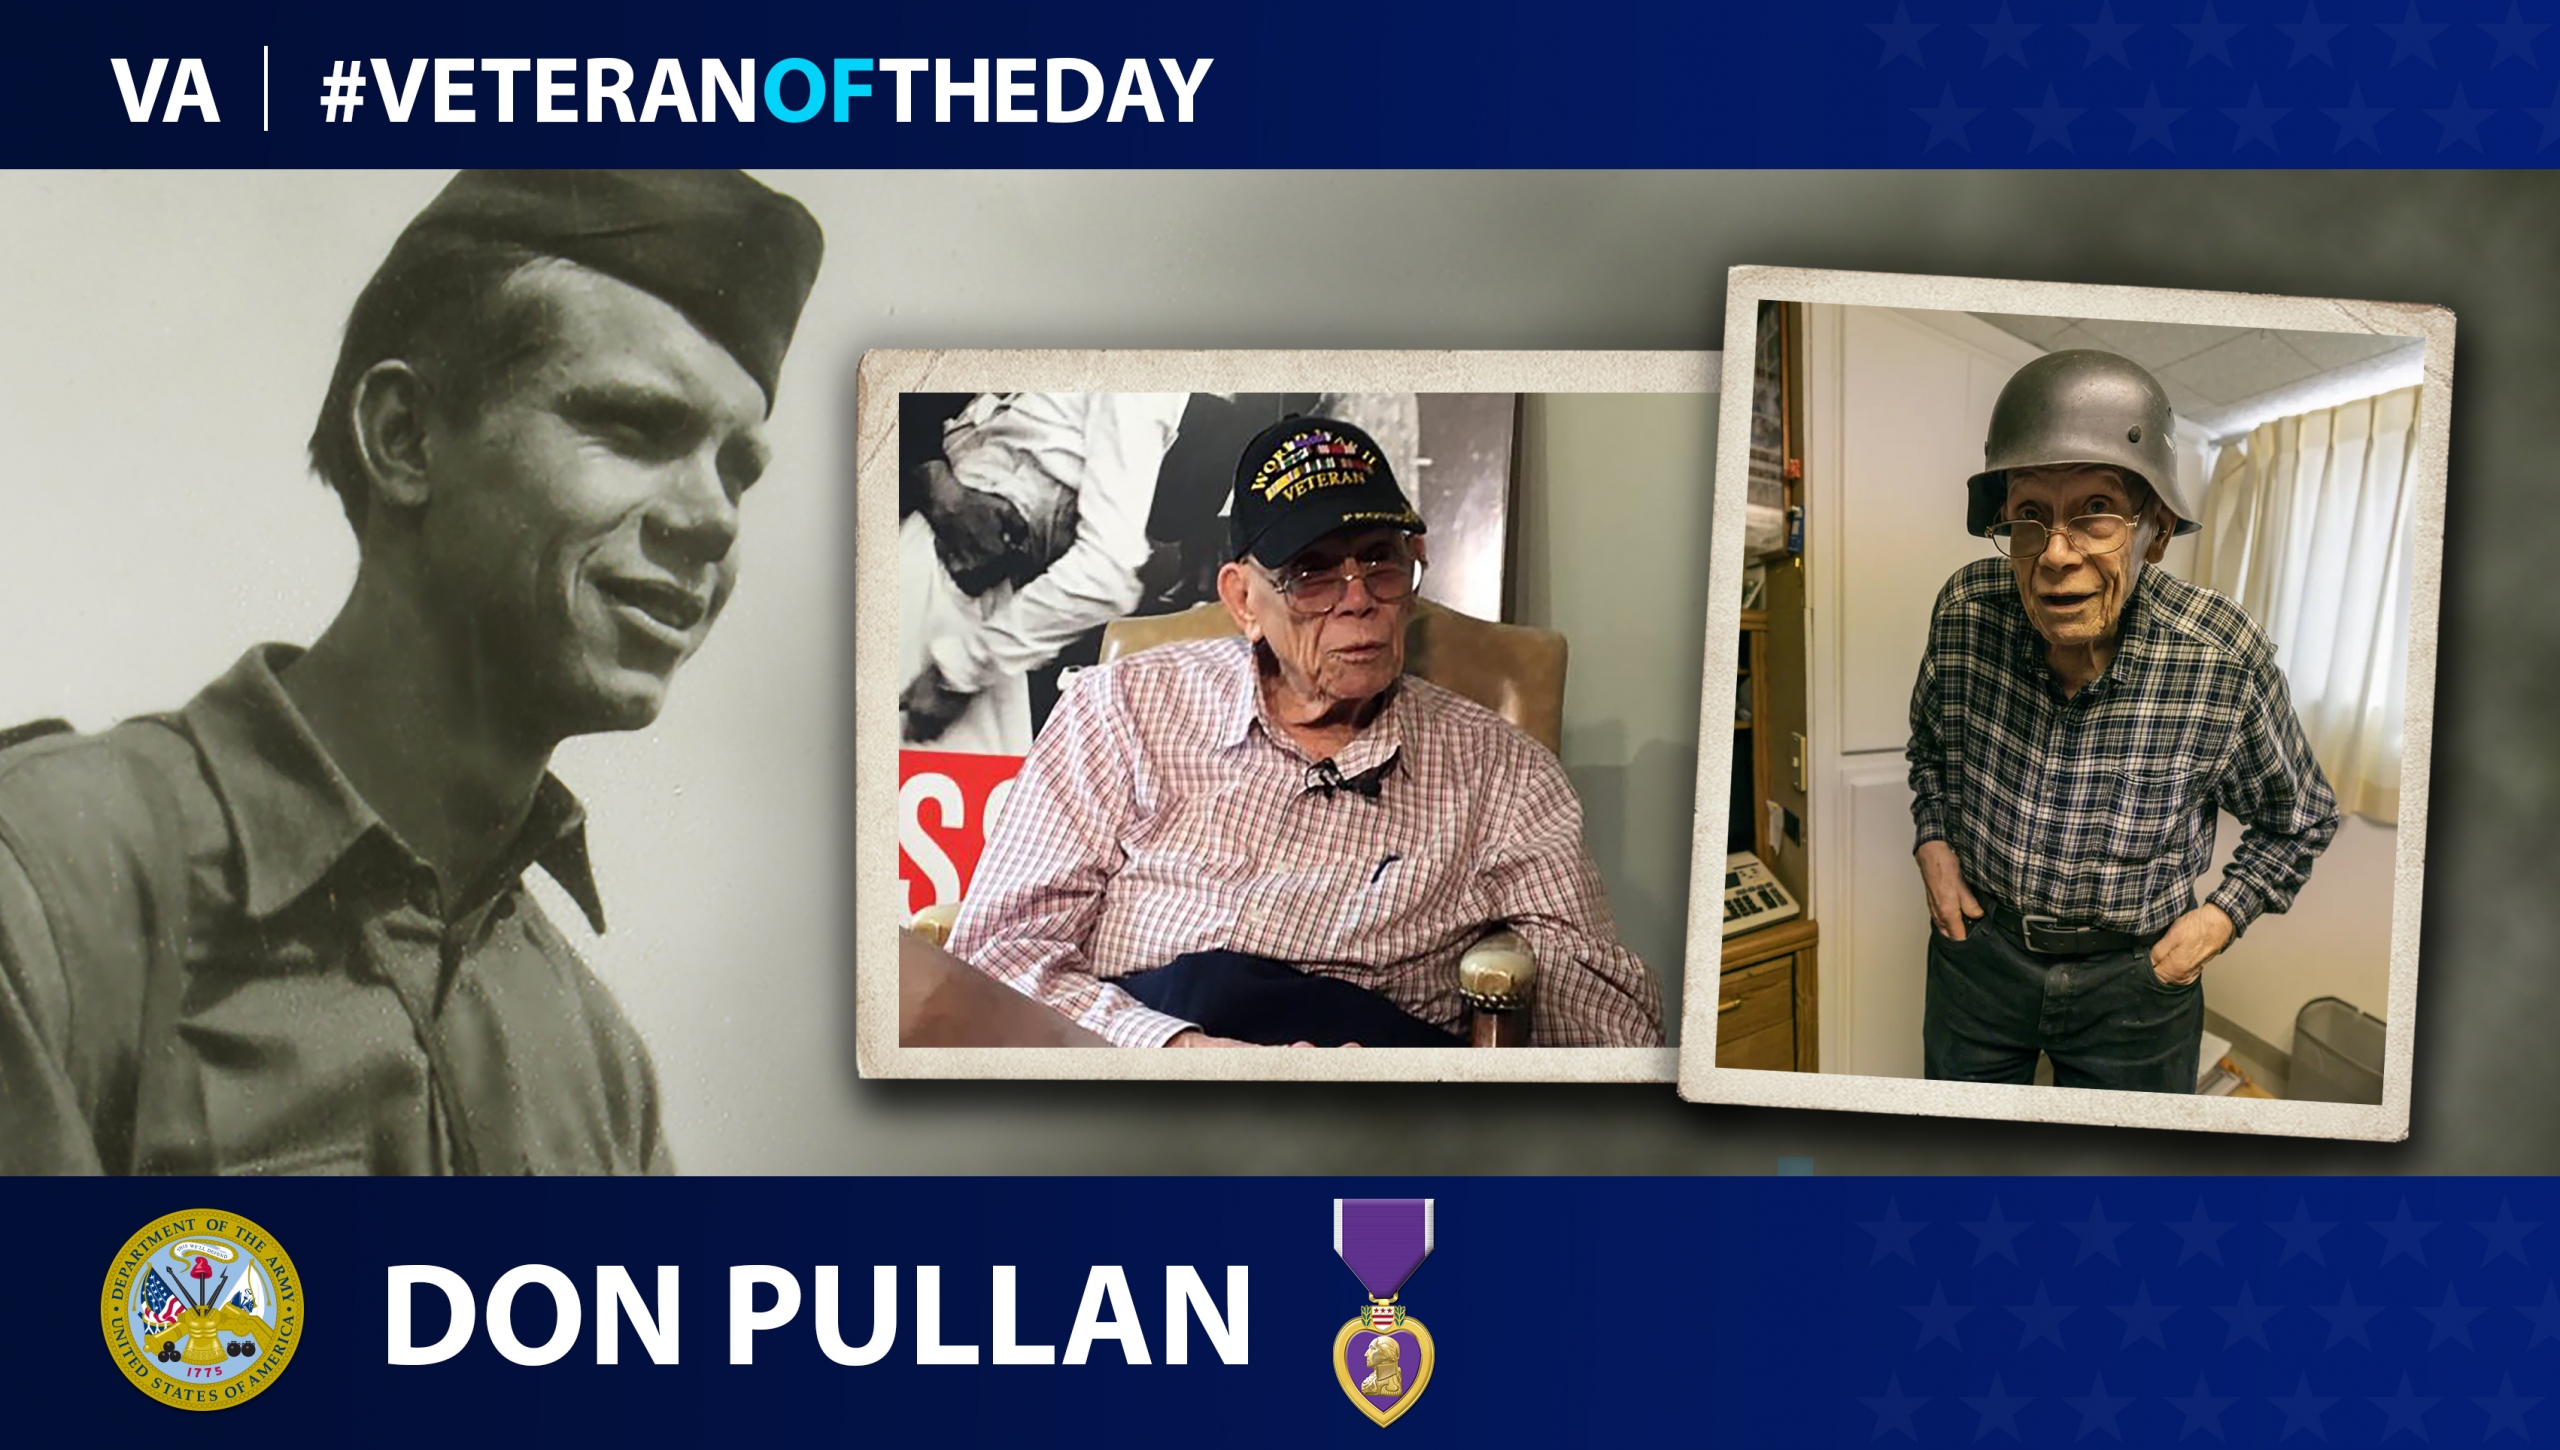 Army Veteran Donald “Don” W. Pullan is today’s Veteran of the Day.